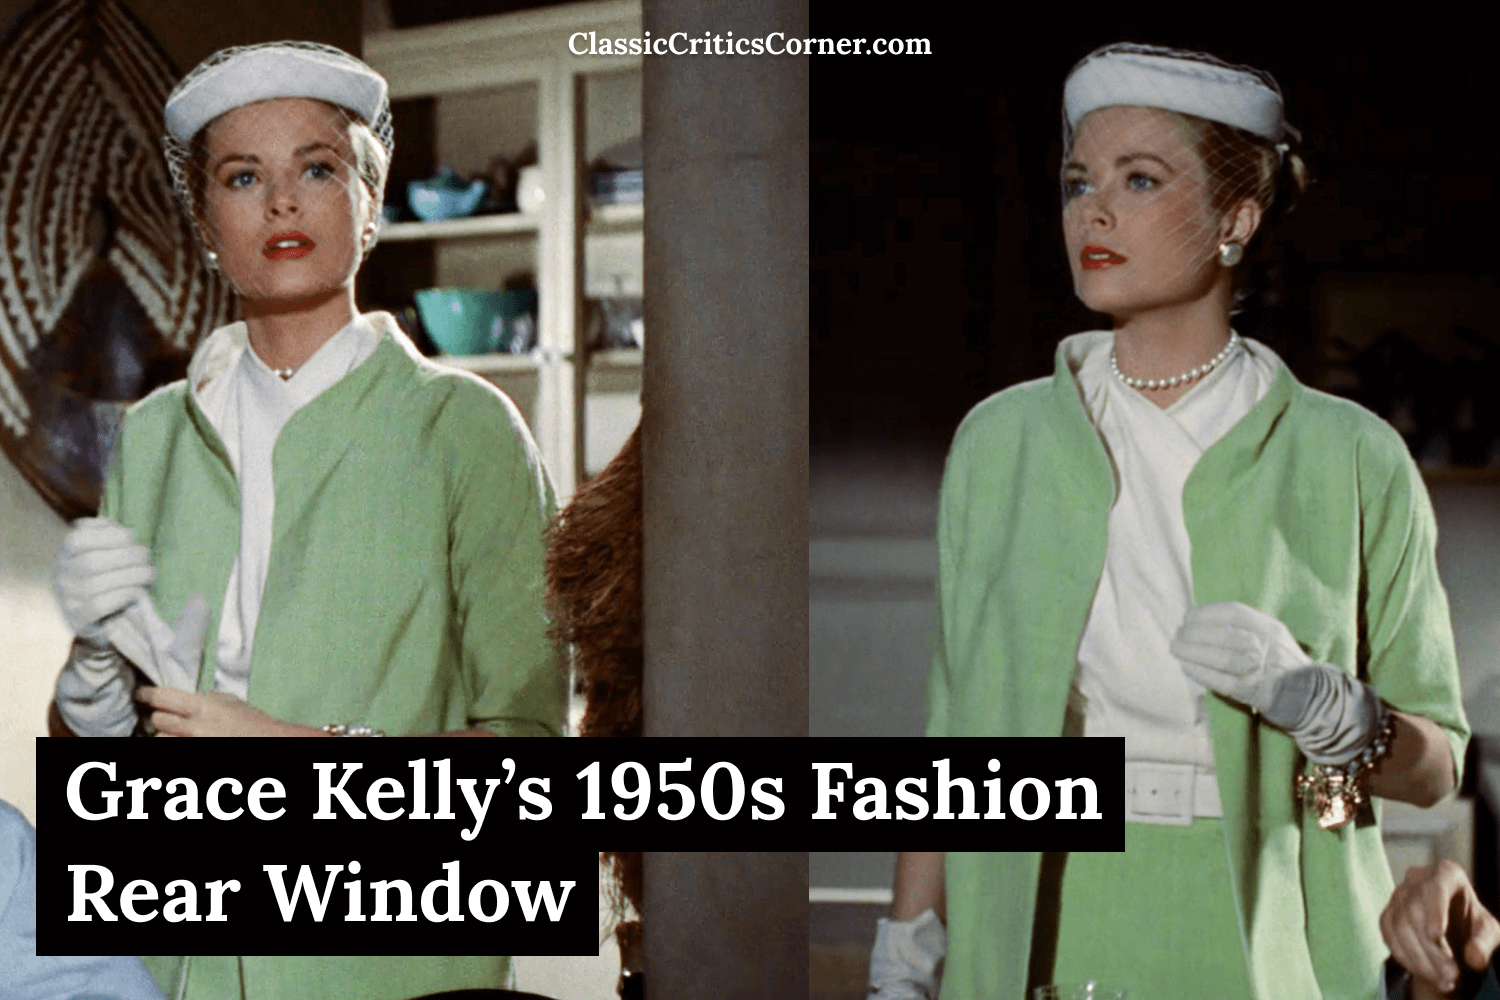 Grace Kelly's 1950s fashion in Rear Window (1954) Classic Critics Corner - Your source Old Hollywood Glamour, 1940s Fashion & 1950s Fashion